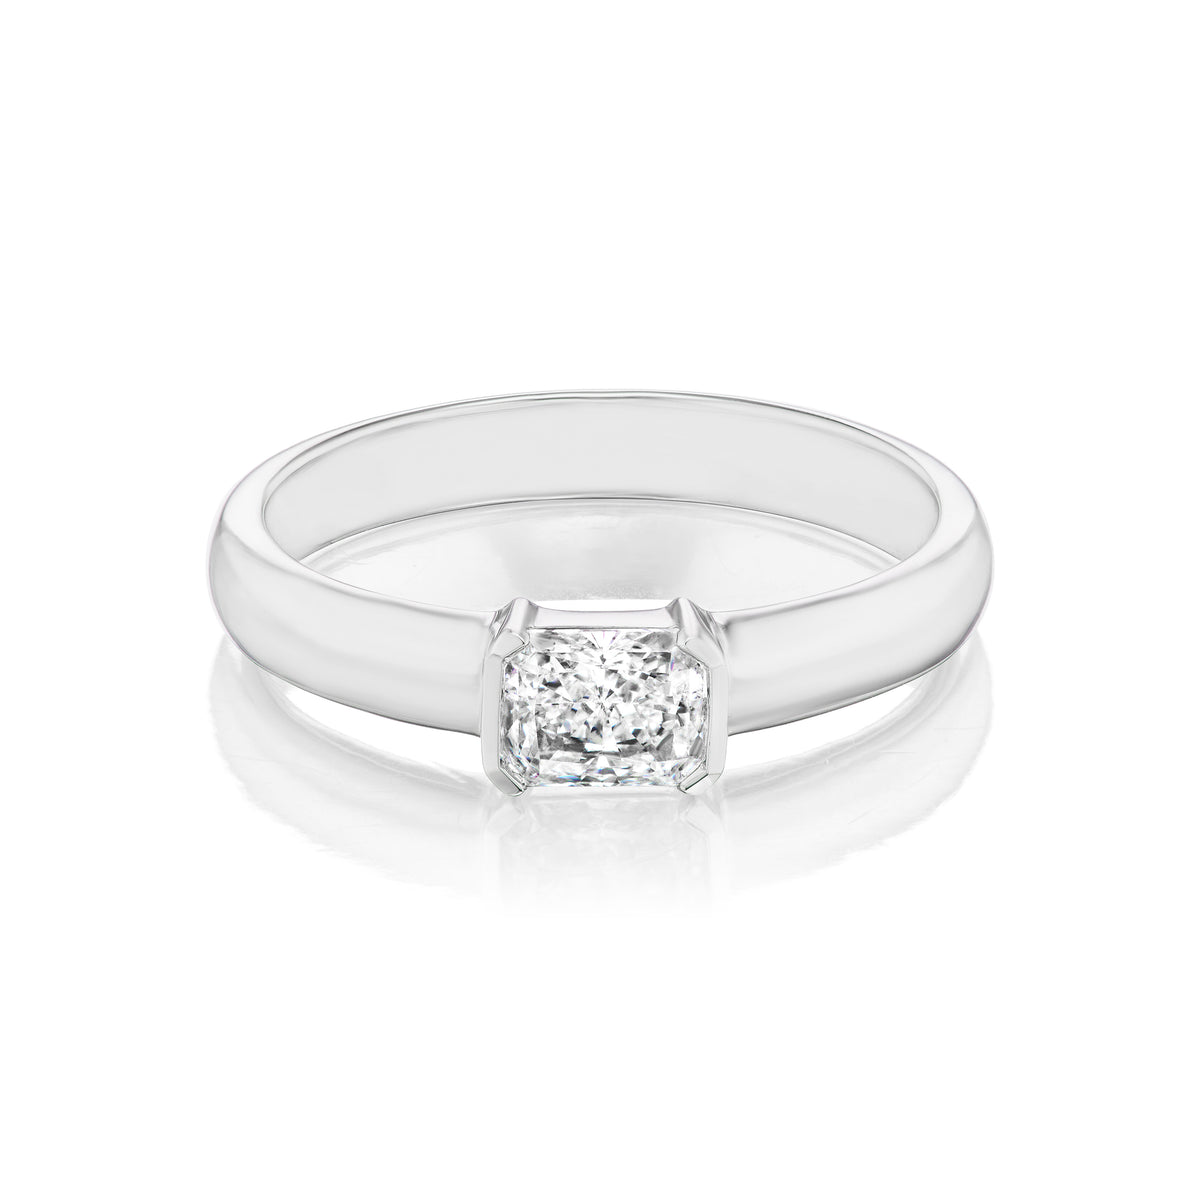 East-West Radiant Cut Diamond Solitaire Band